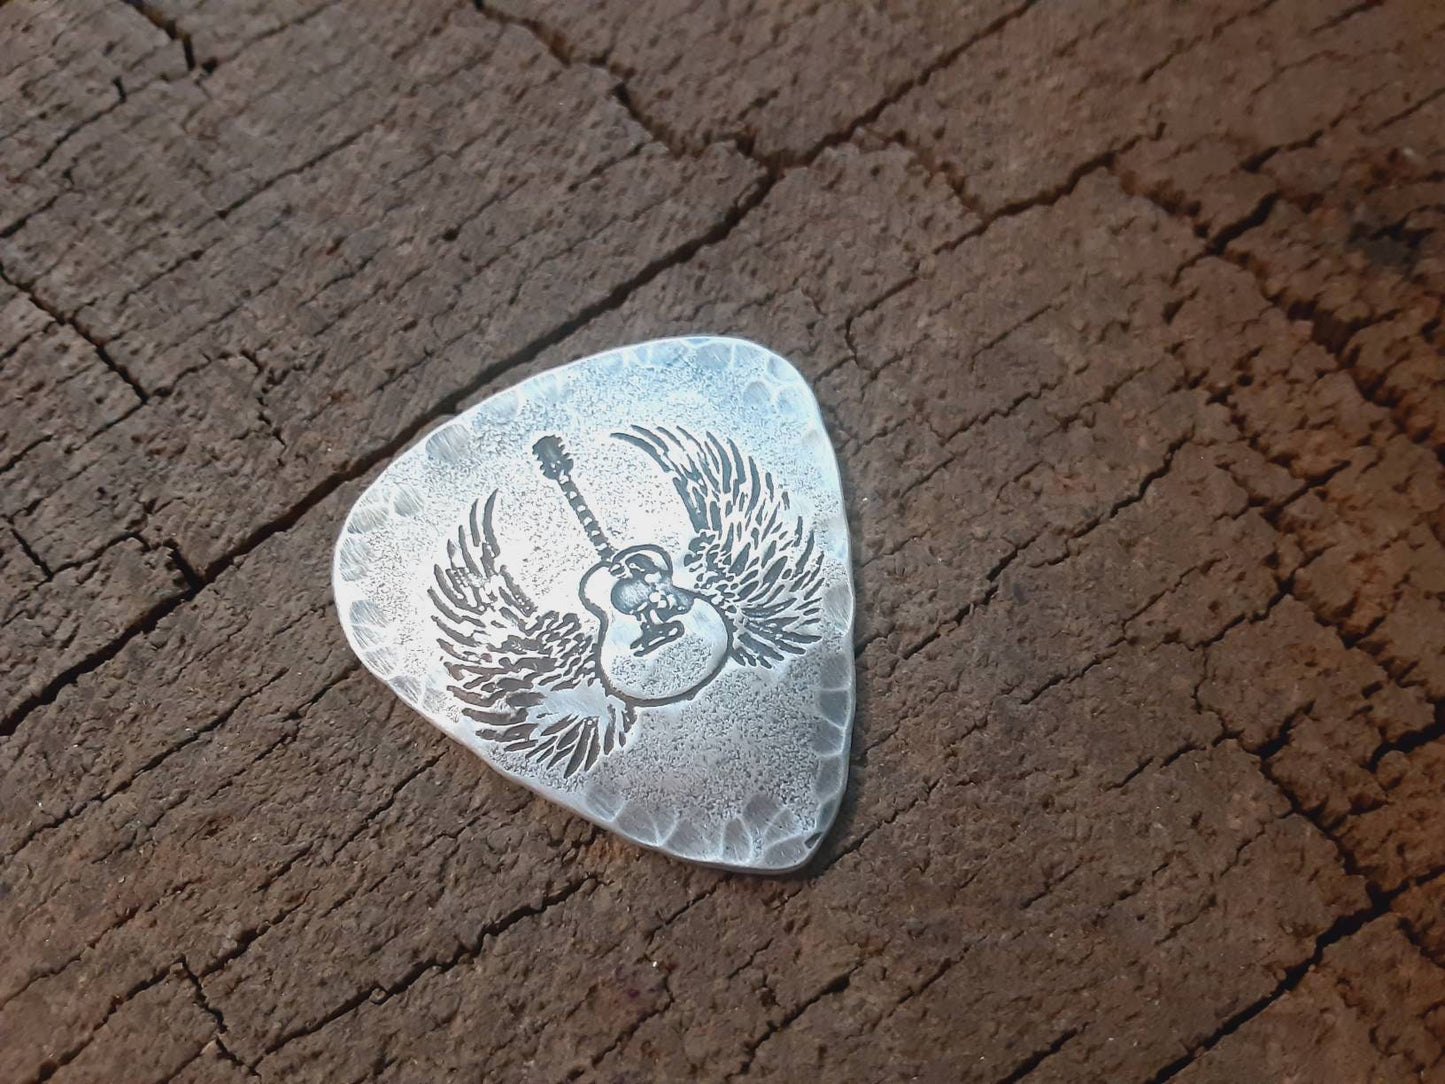 Winged guitar on hammered sterling silver guitar pick